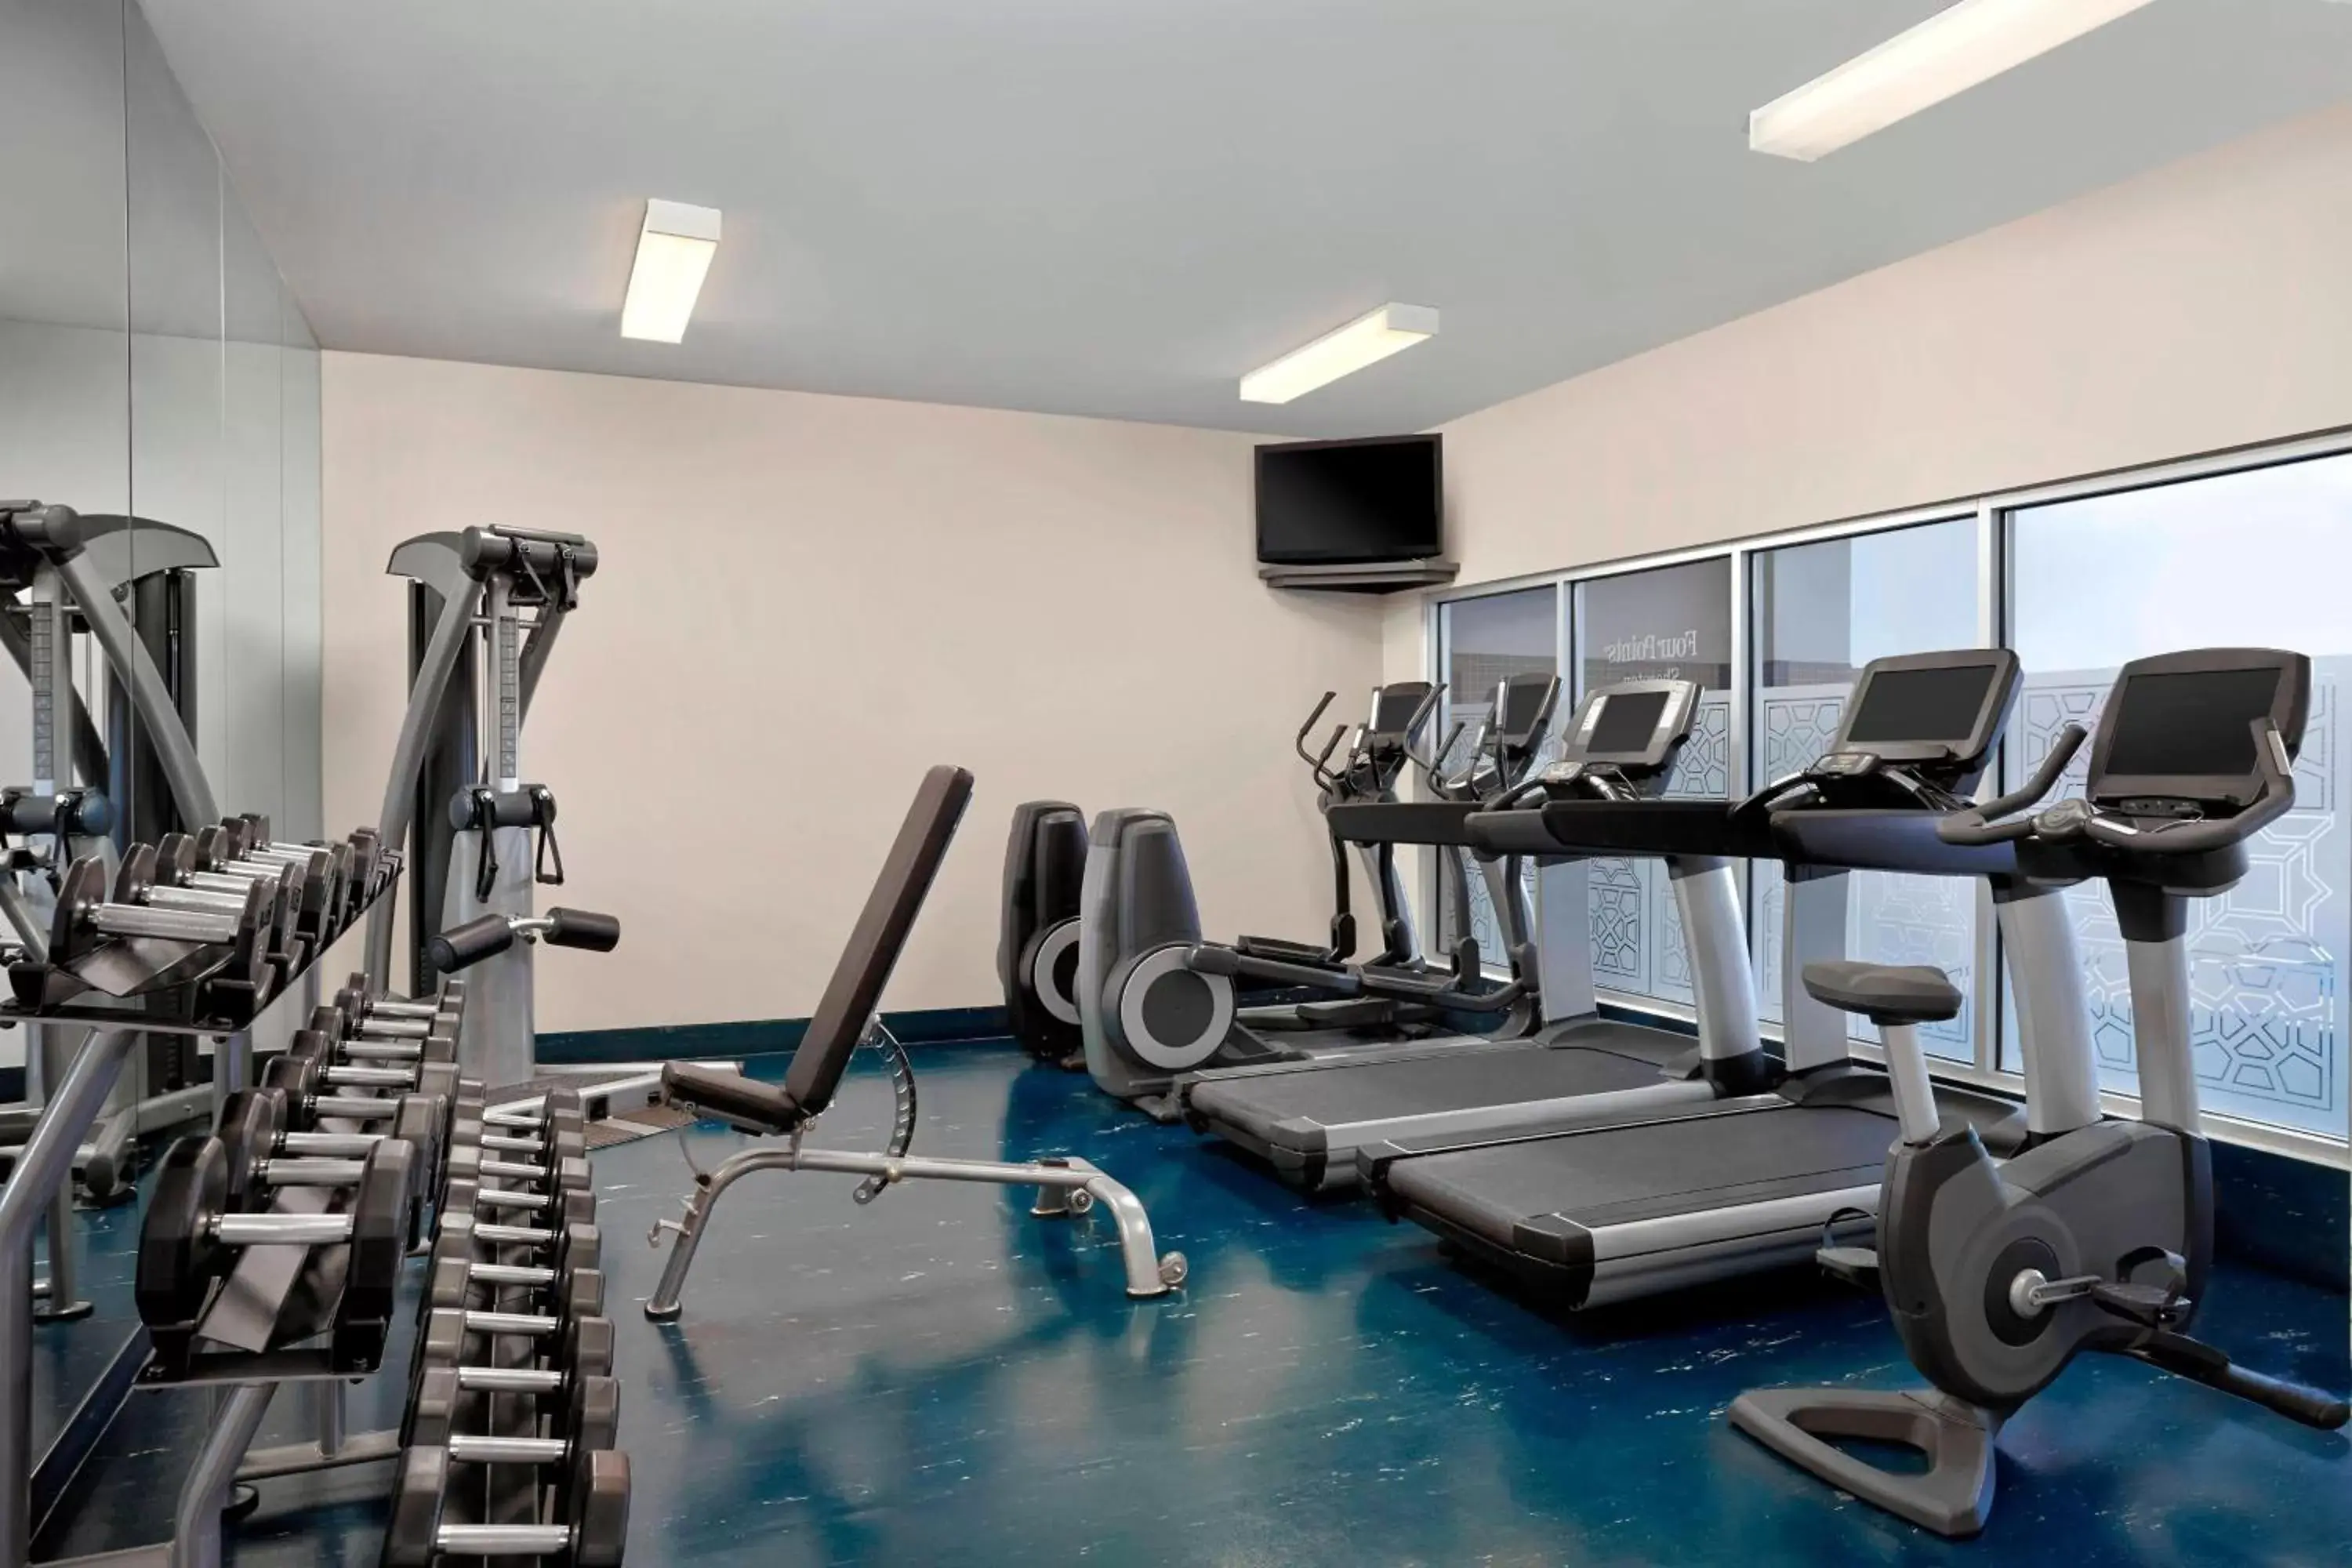 Fitness centre/facilities, Fitness Center/Facilities in Four Points by Sheraton Hotel & Suites Calgary West